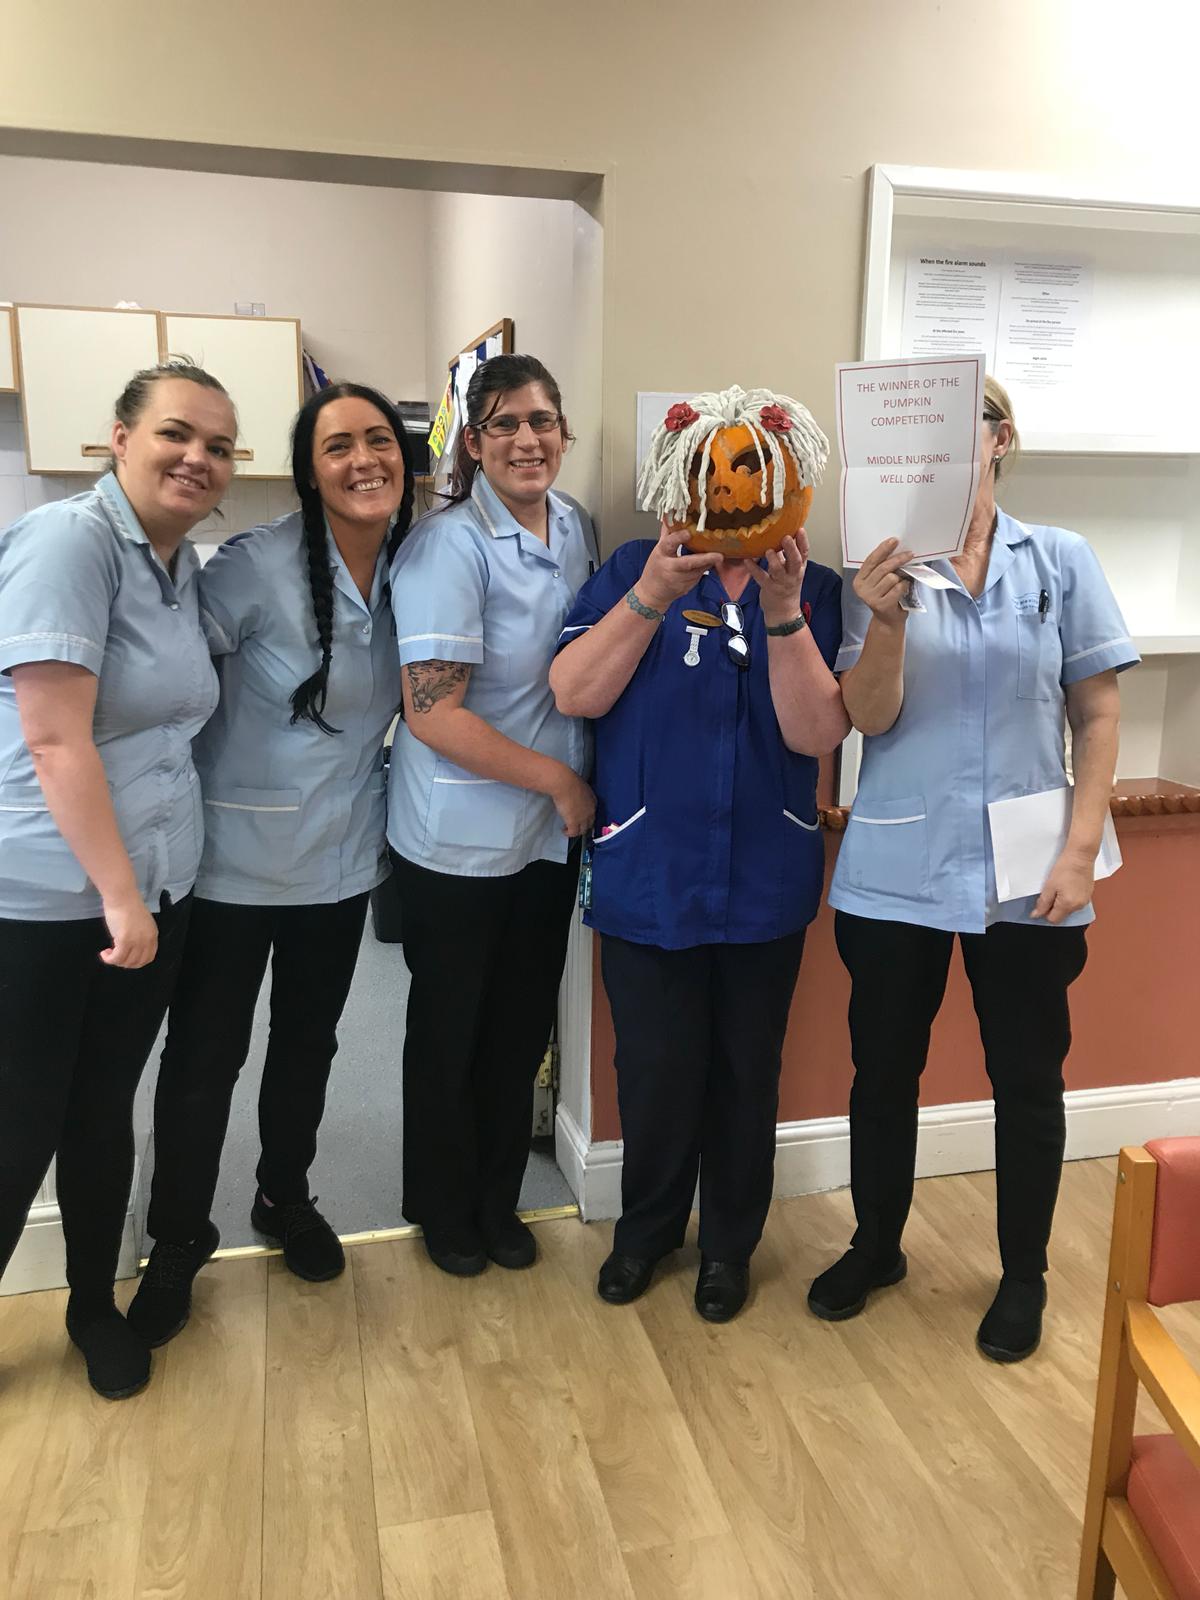 Pumpkin Competition 2018 at Victoria House Care Centre: Key Healthcare is dedicated to caring for elderly residents in safe. We have multiple dementia care homes including our care home middlesbrough, our care home St. Helen and care home saltburn. We excel in monitoring and improving care levels.